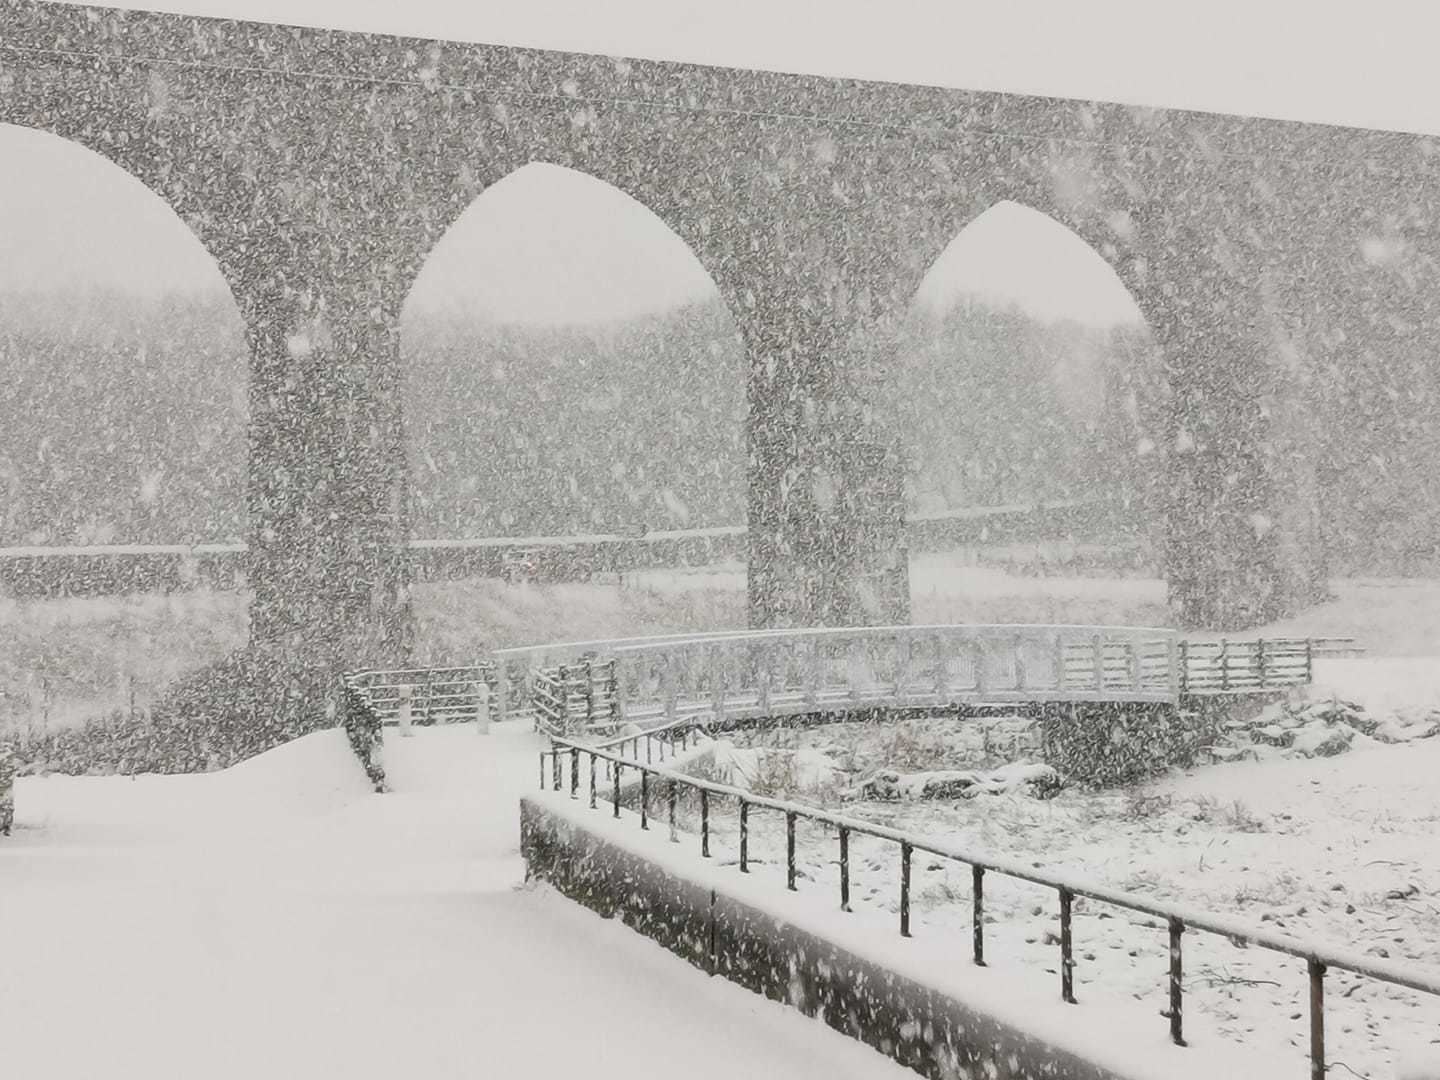 Cullen Viaduct pictured through snowfall by Angela Pritchard.